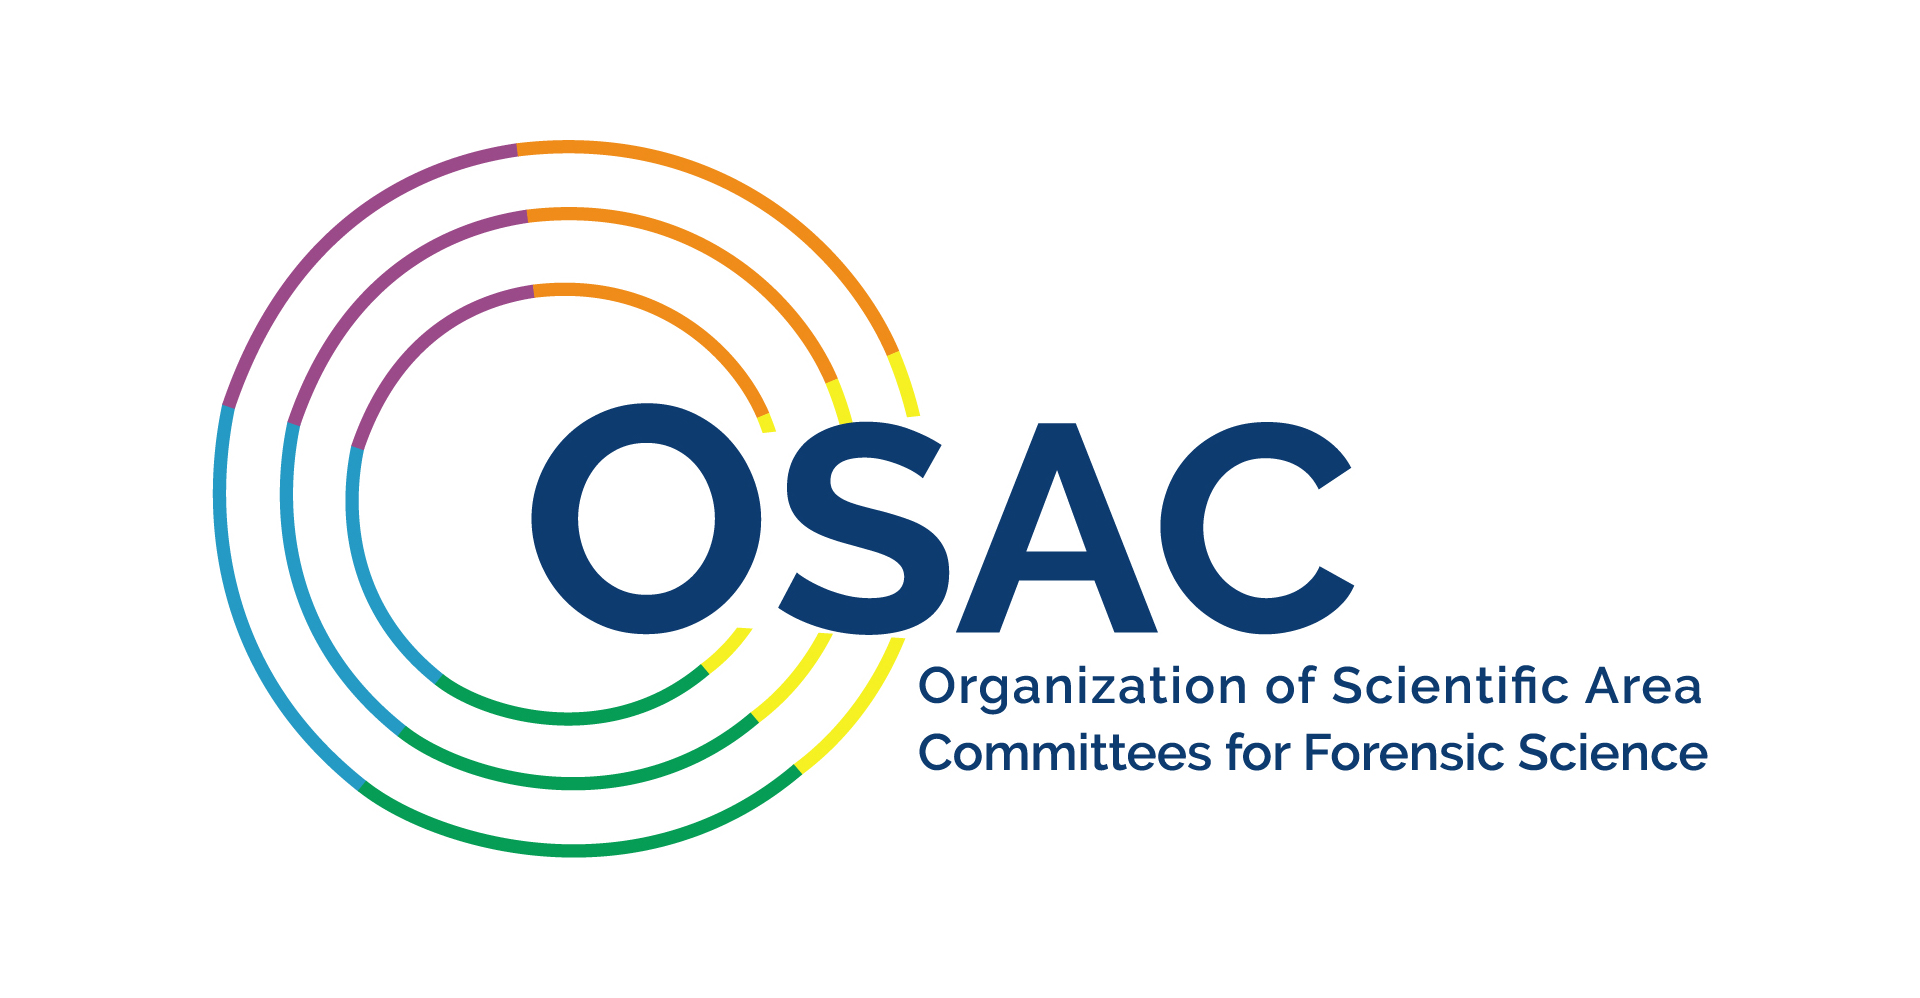 Organization of Scientific Area Committees (OSAC) for Forensic Science